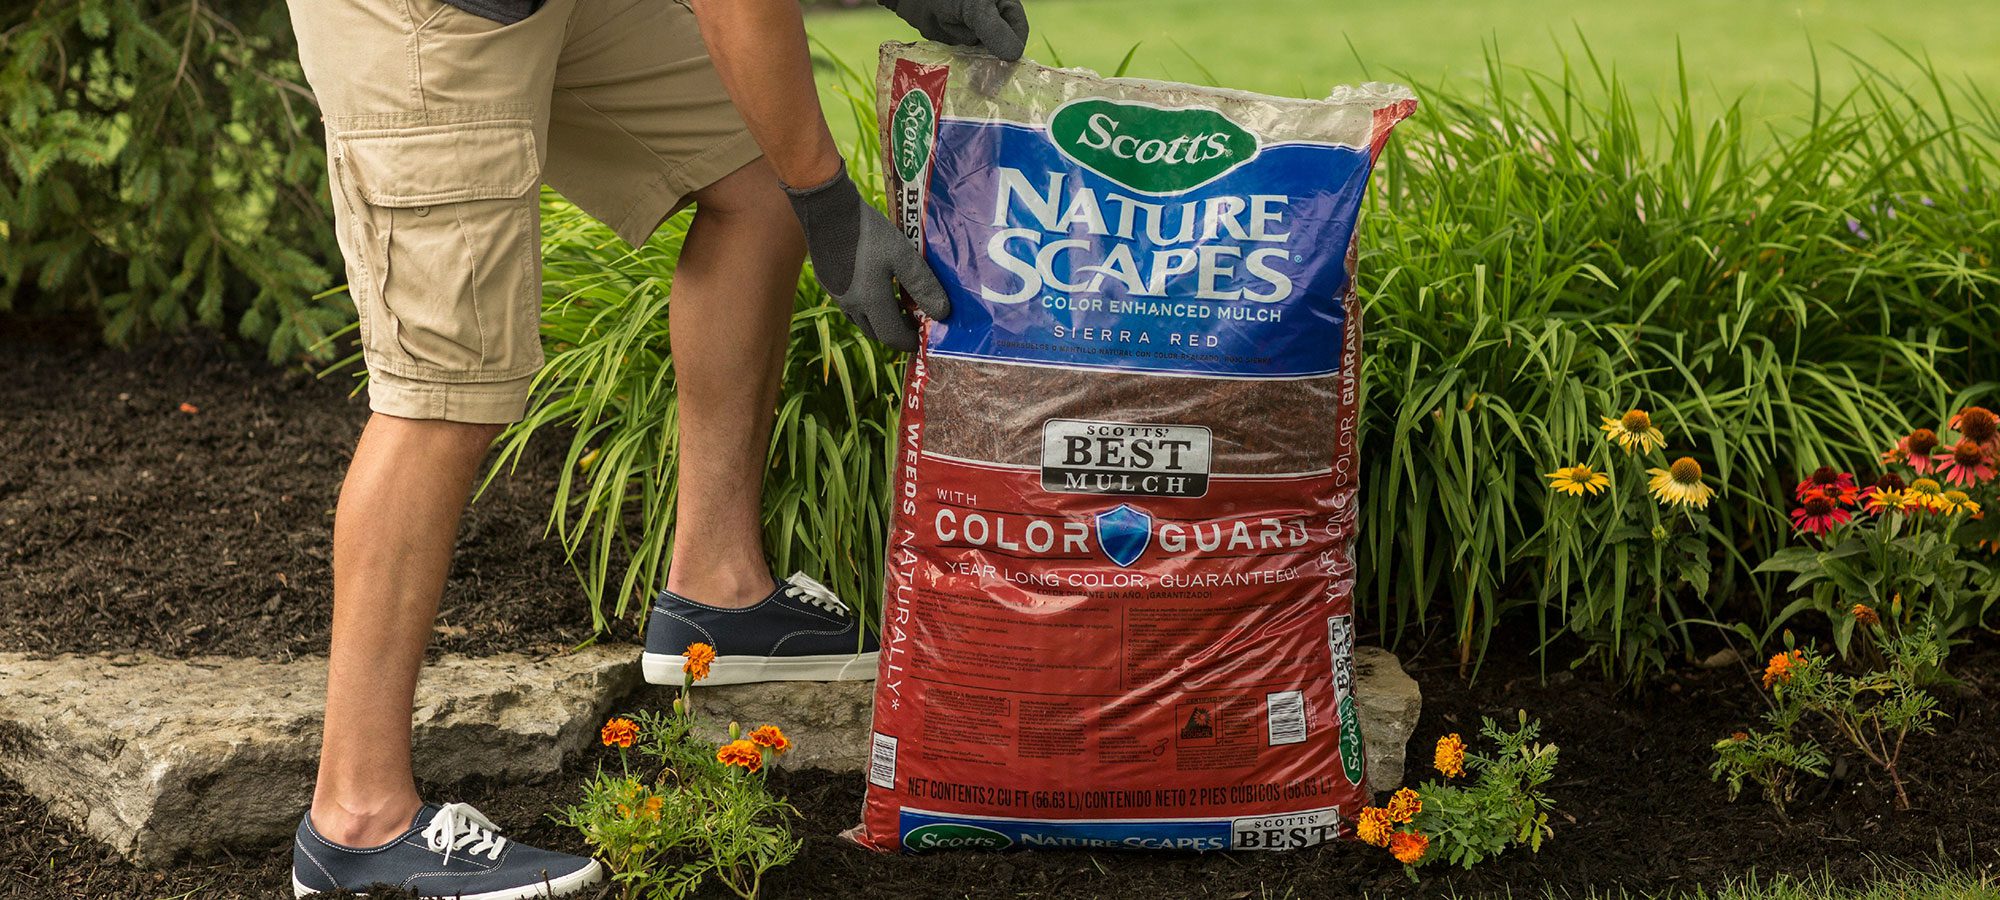 Scotts Nature Scapes Mulch